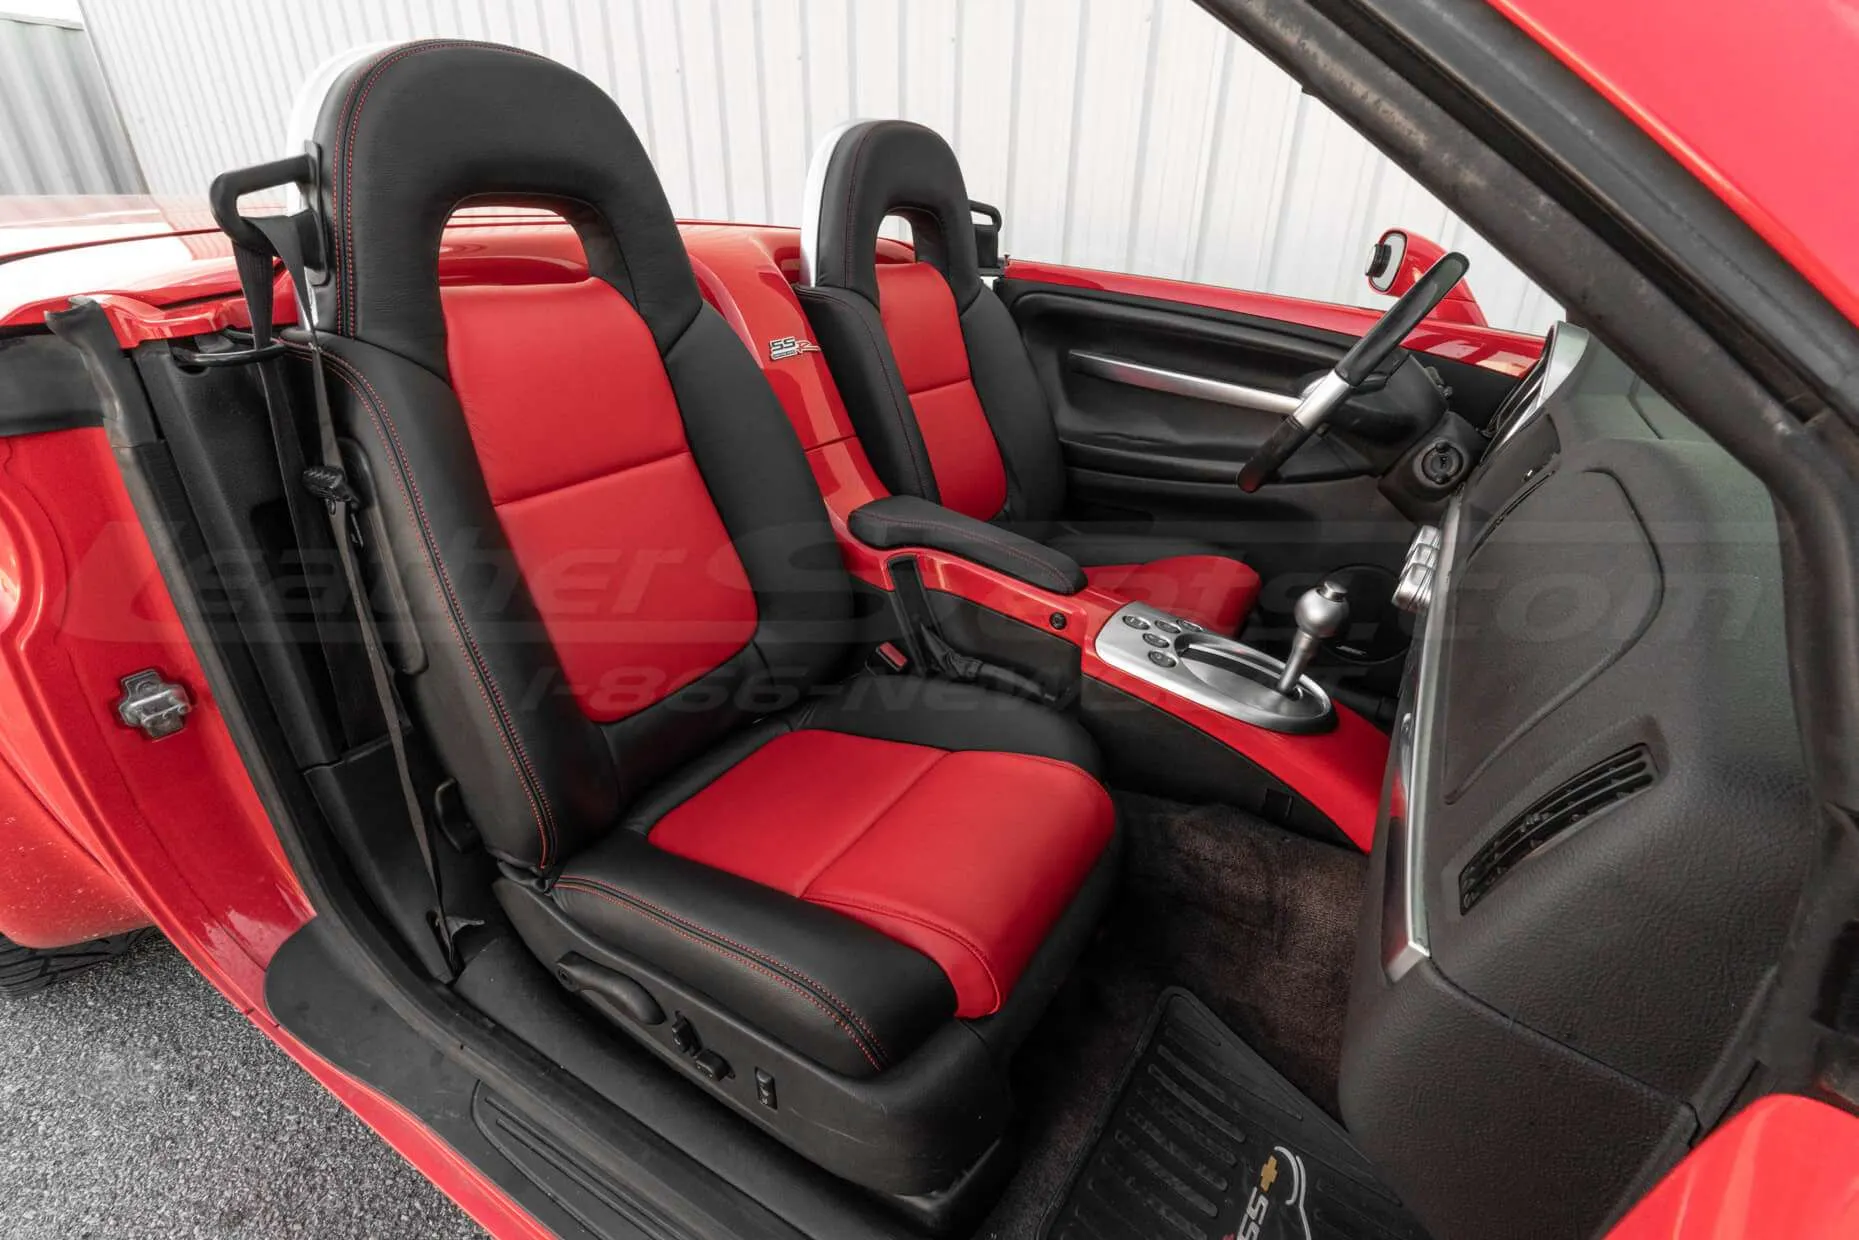 Installed leather seats in Black and Bright Red for Chevy SSR Convertible